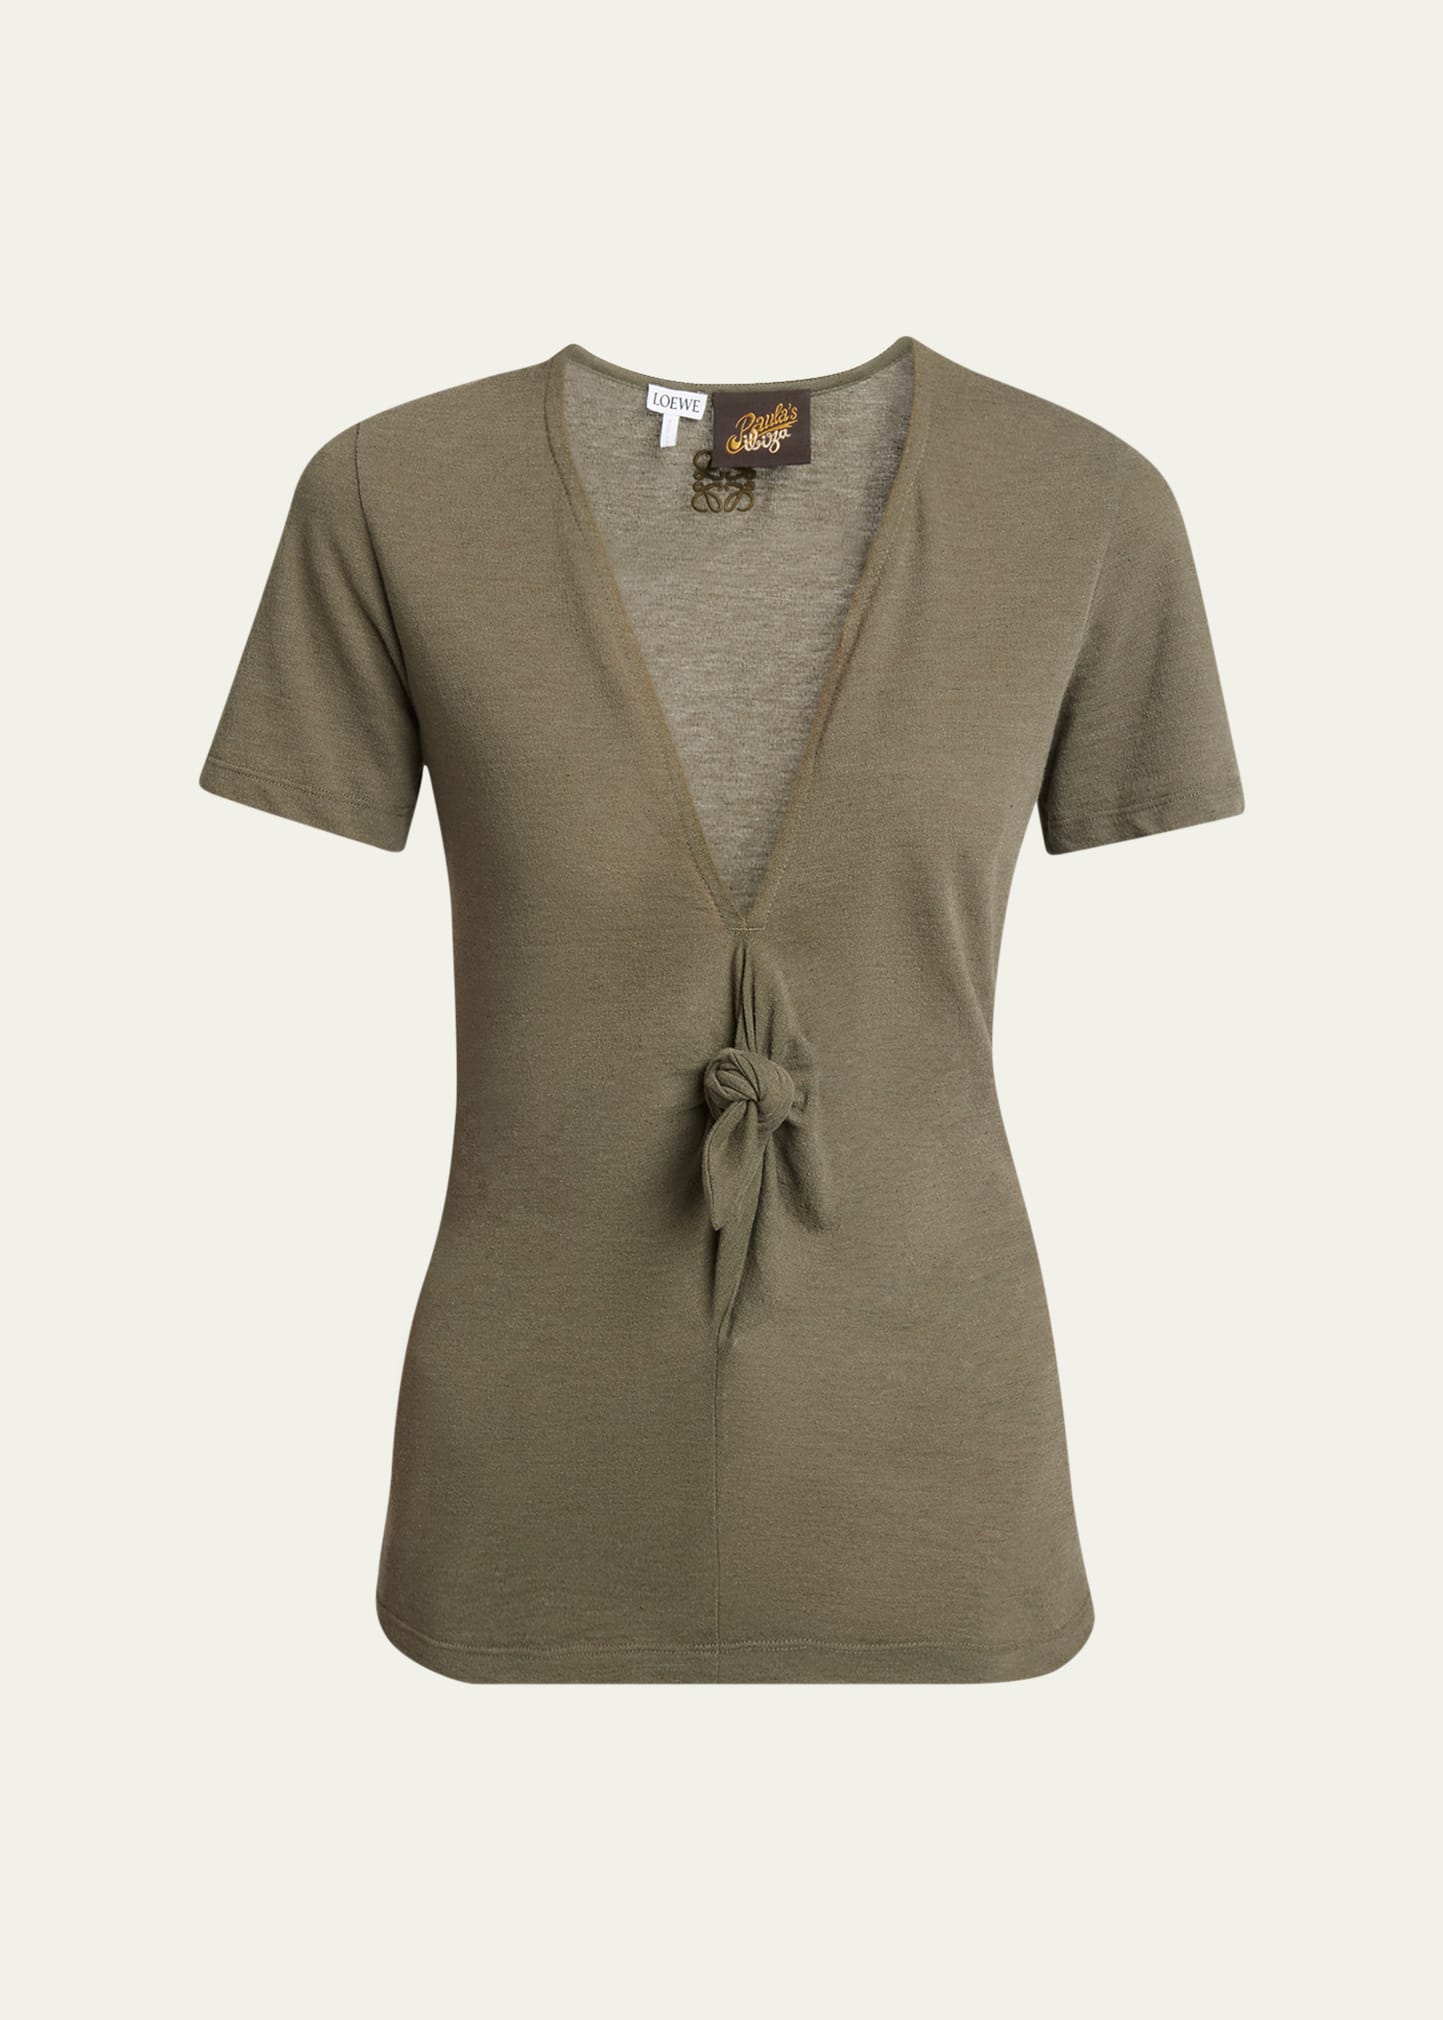 Loewe Knot Front V-neck Tee In Loden Gree